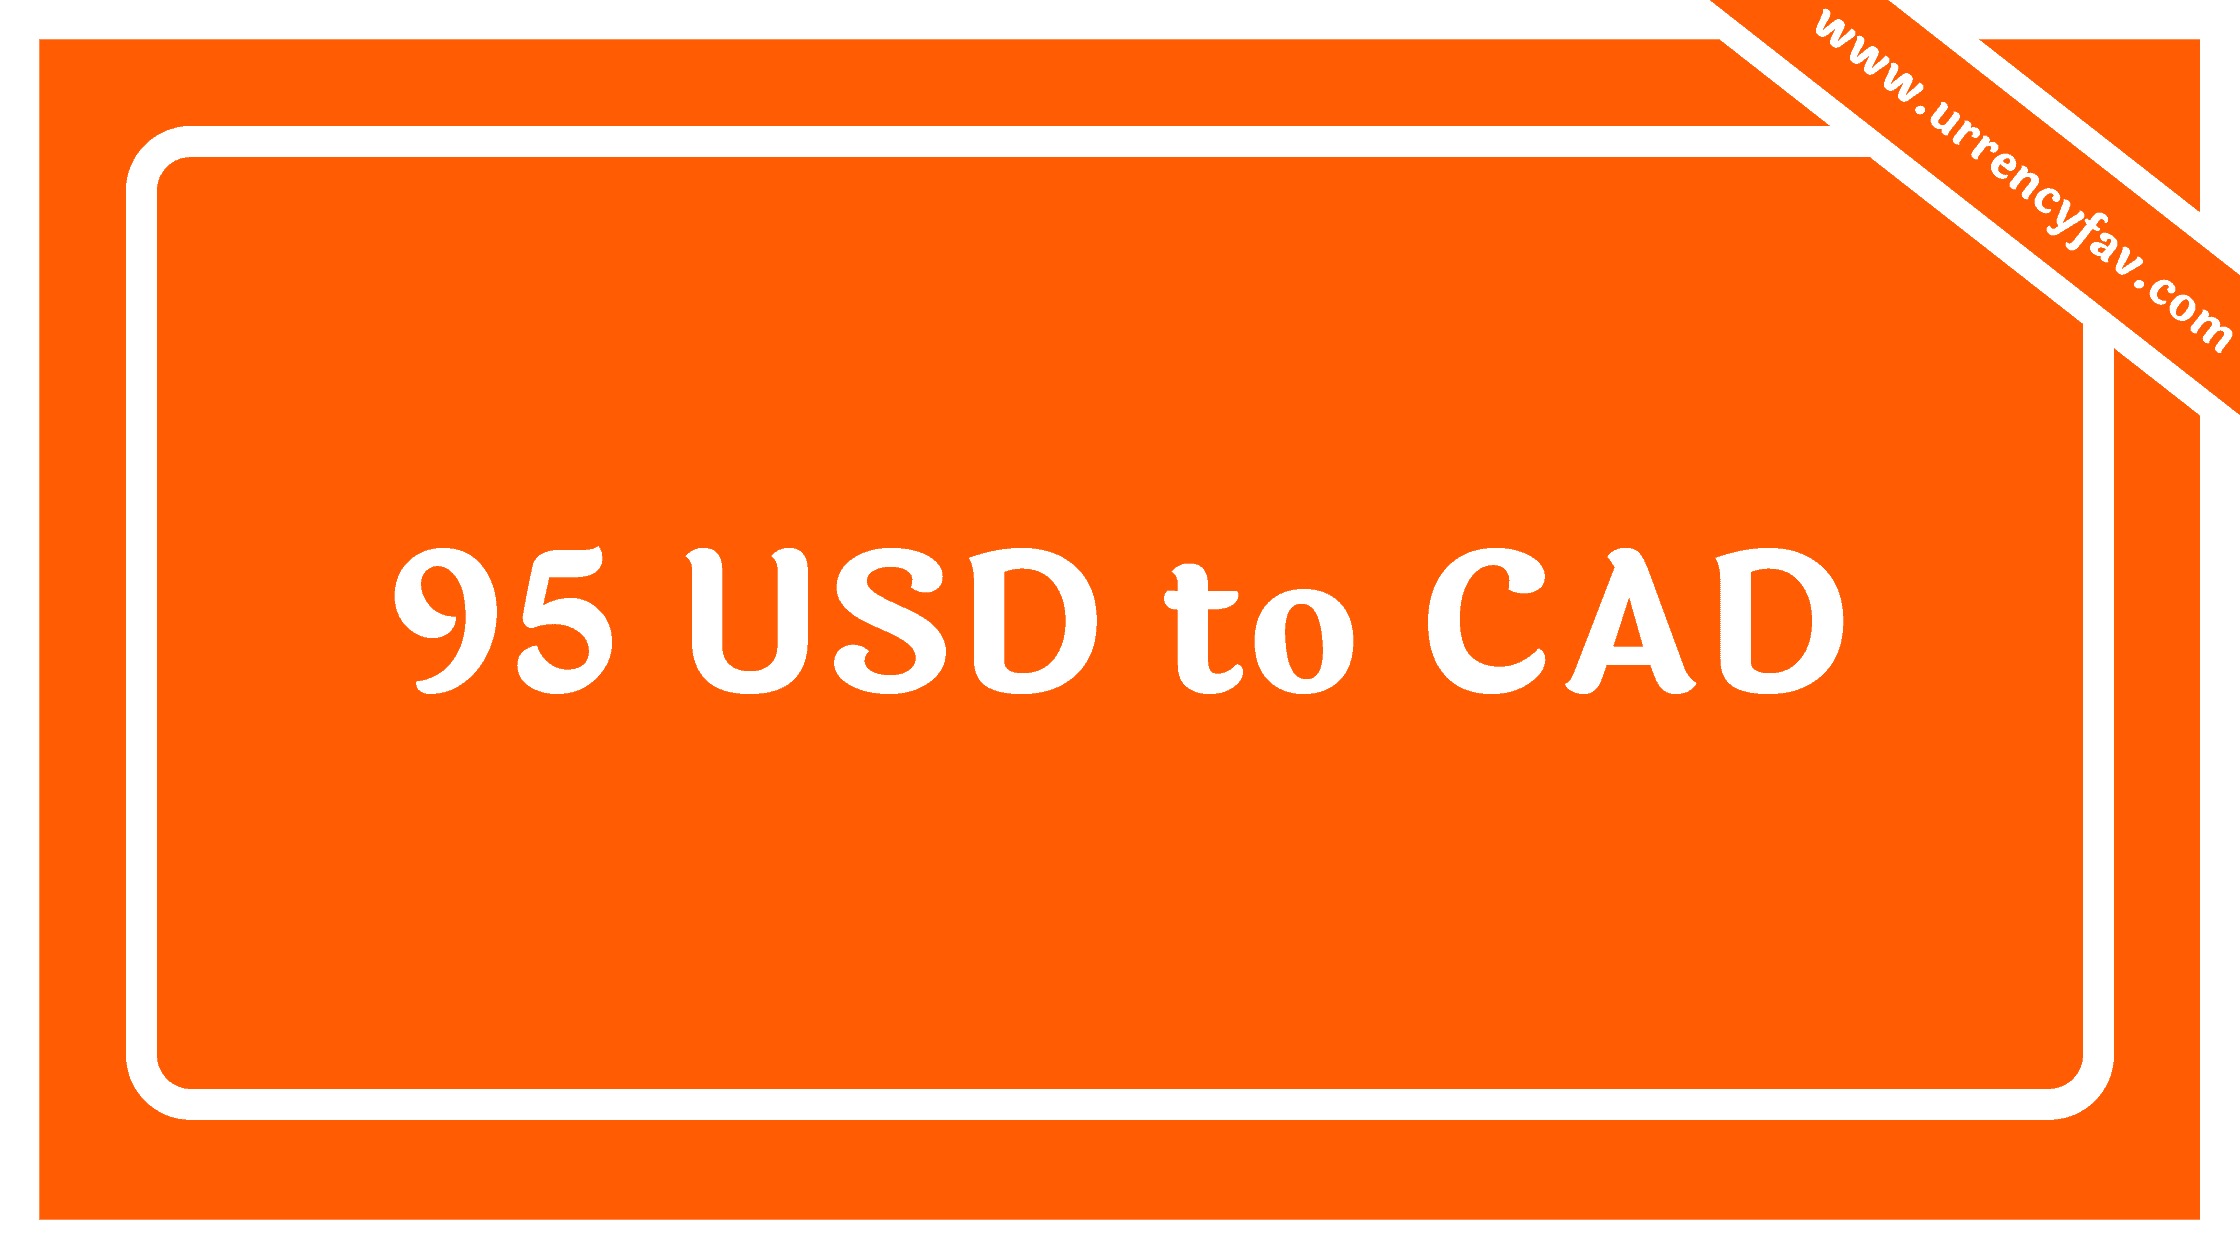 95 USD to CAD